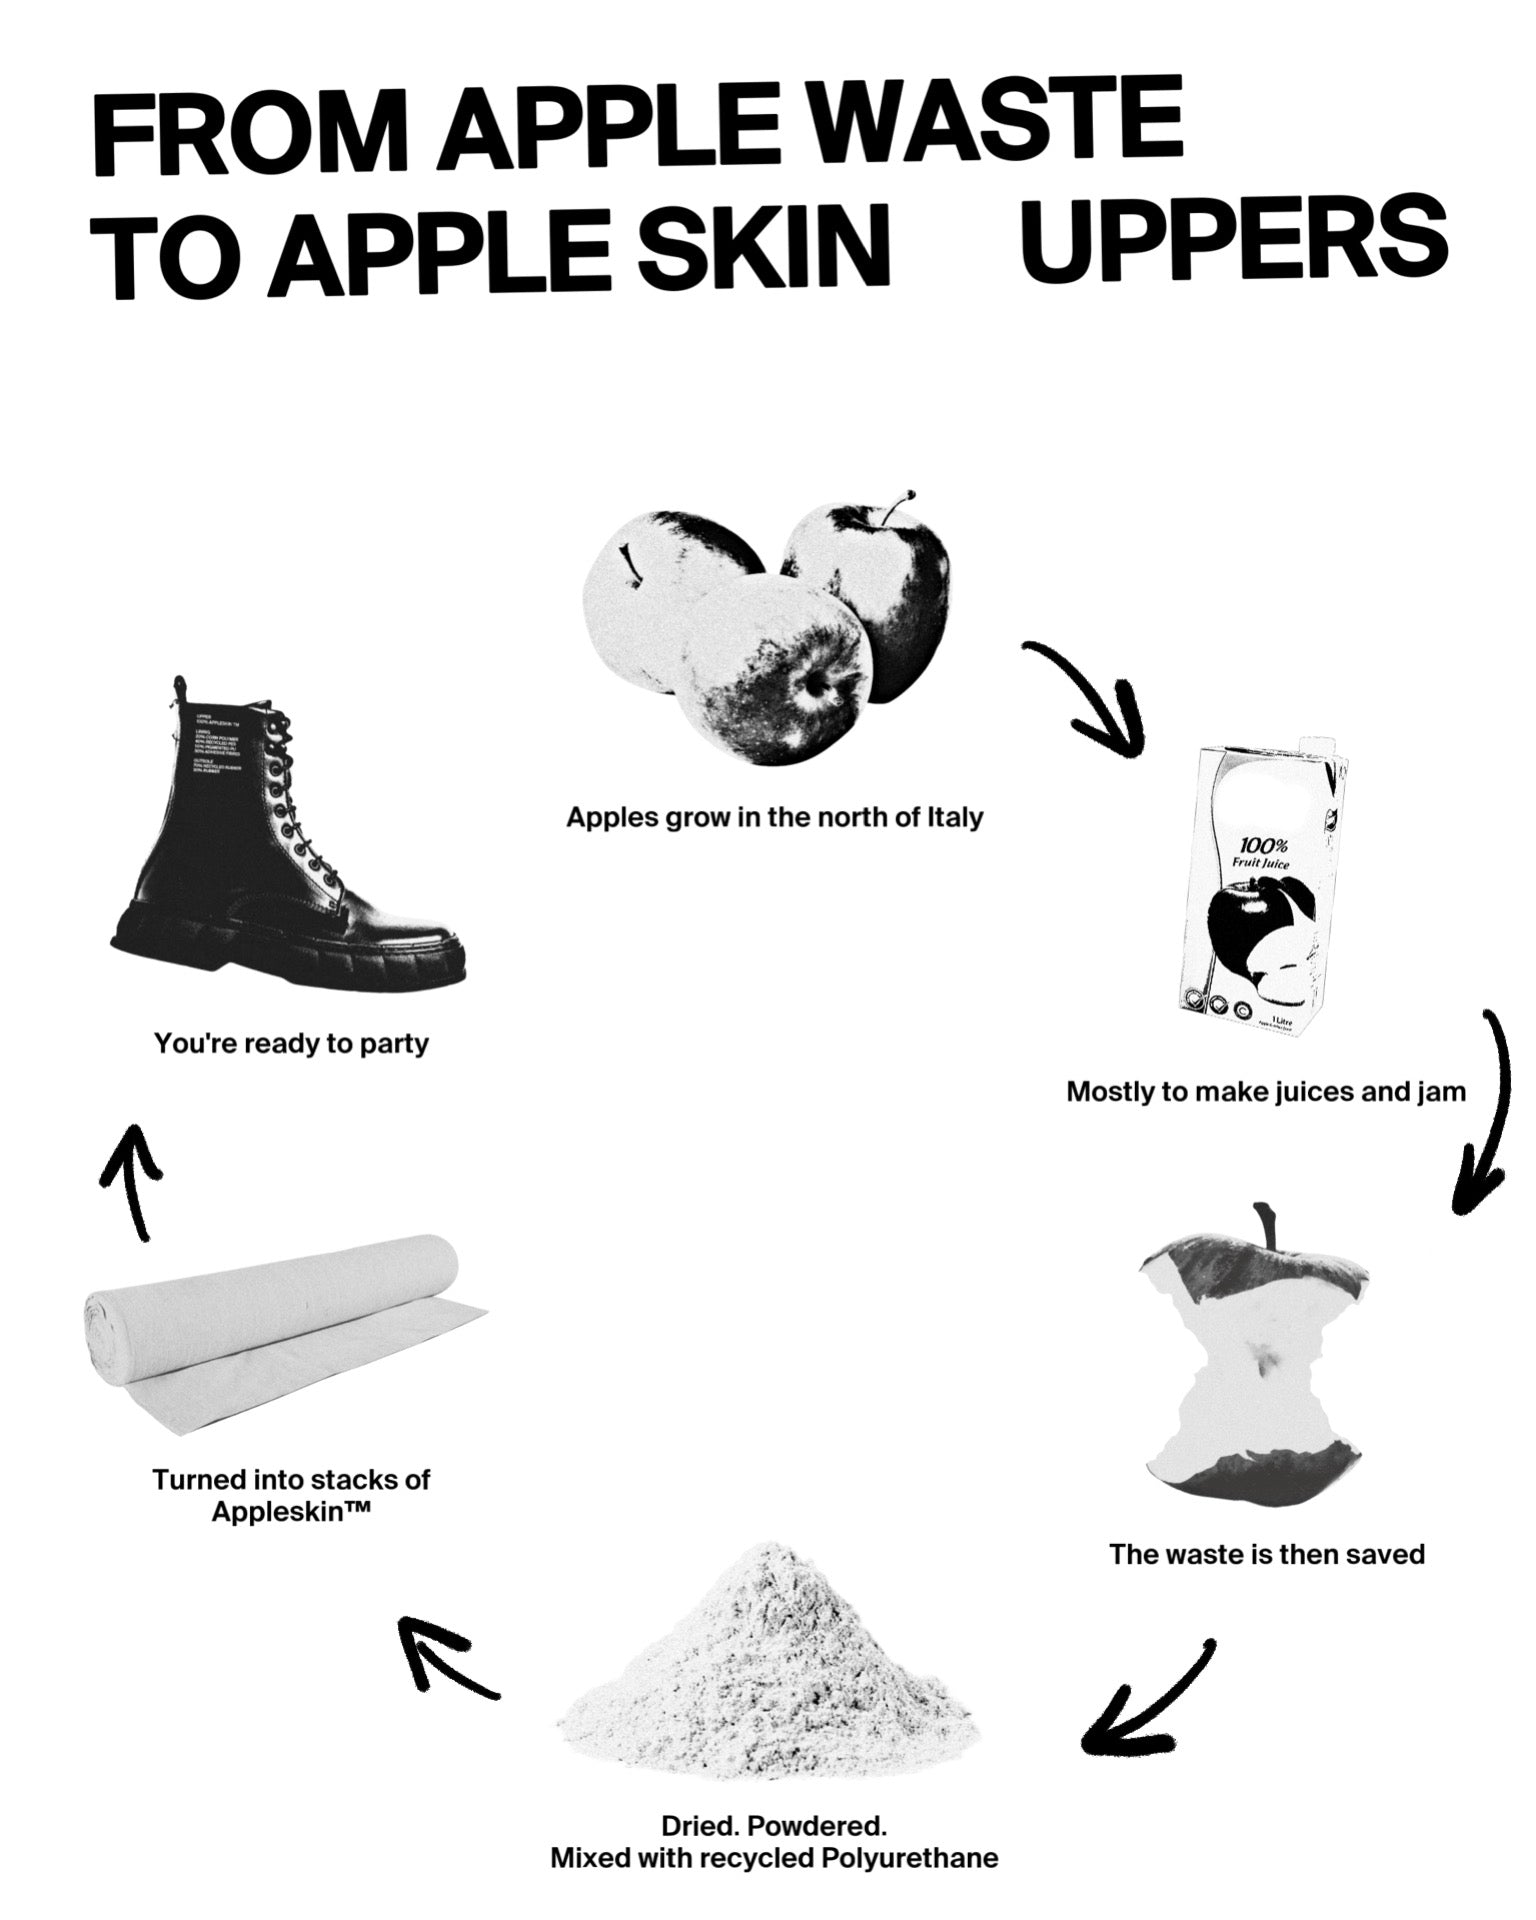 Material cycle showing the process from Apple to our appleskin material used for the 1992 combat boot